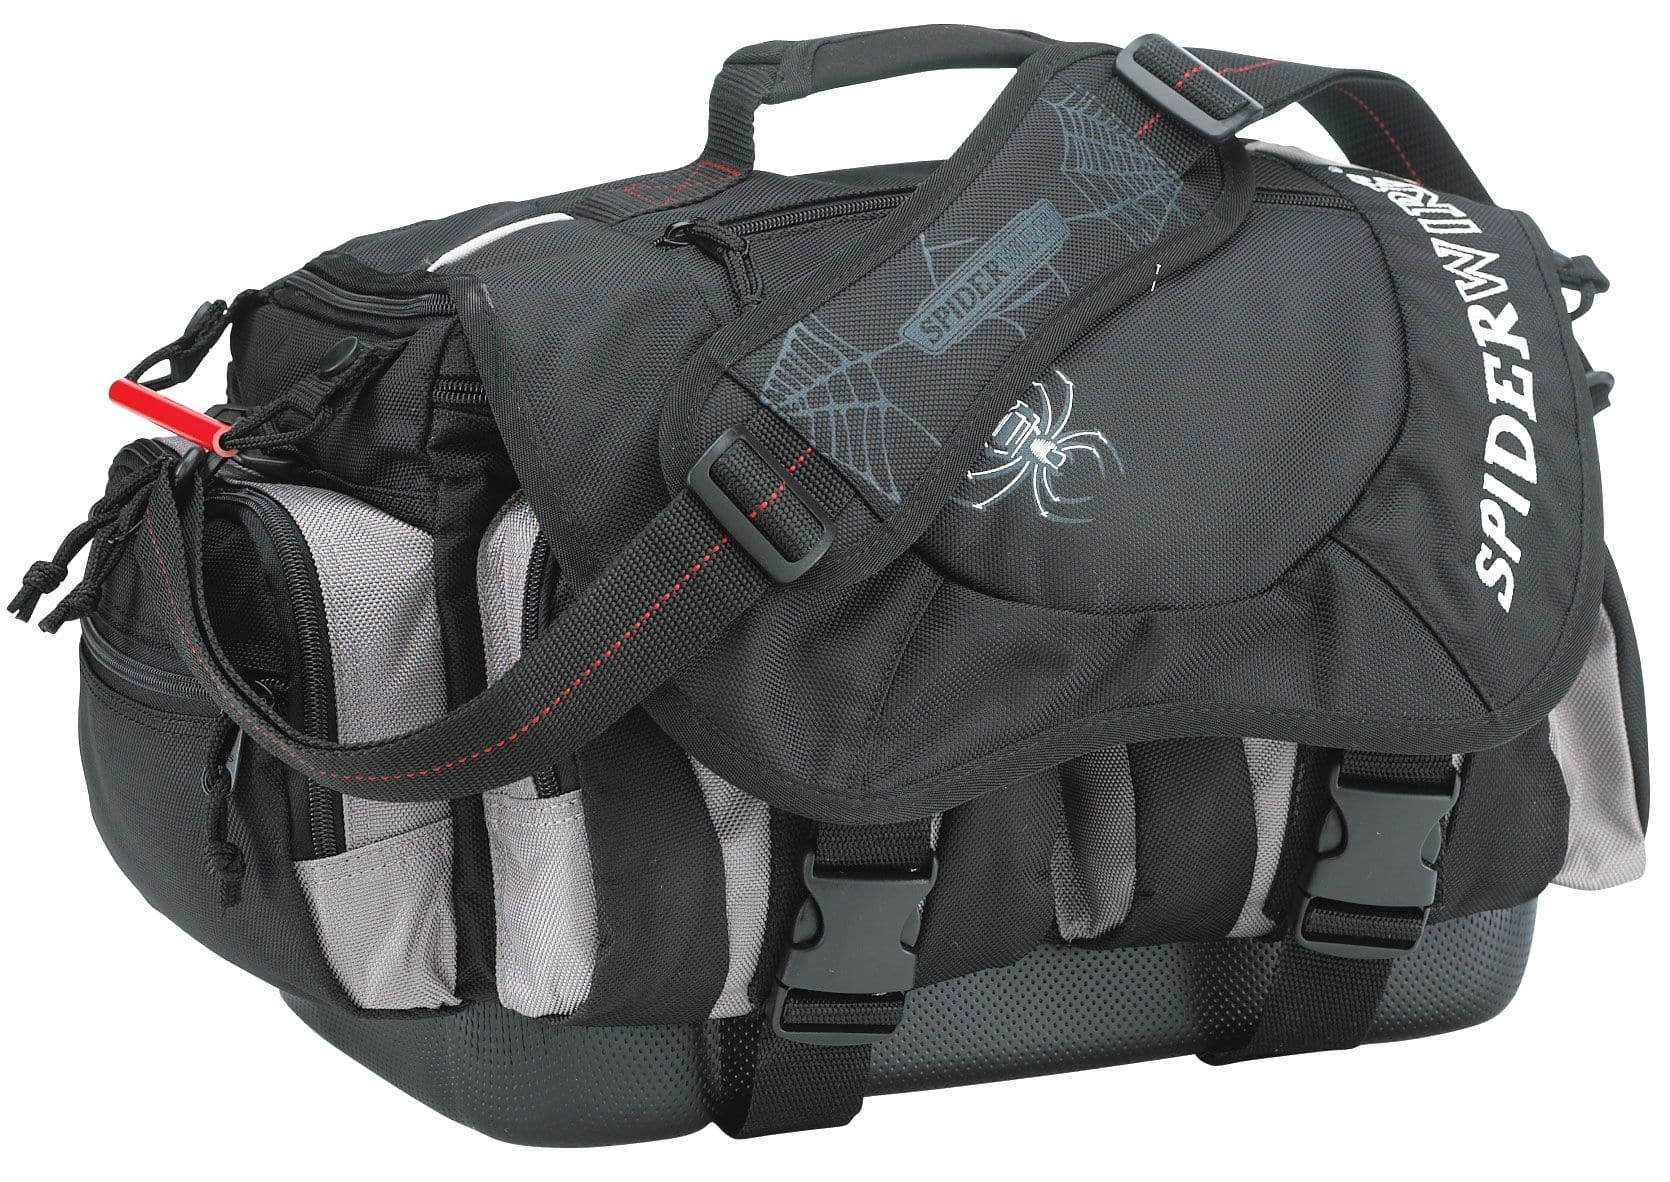 https://media-www.canadiantire.ca/product/playing/fishing/fishing-accessories/0781252/spiderwire-wolf-spider-tackle-bag-with-4-large-boxes-0429cdb6-14f5-487c-9d03-16b716e3f2c9-jpgrendition.jpg